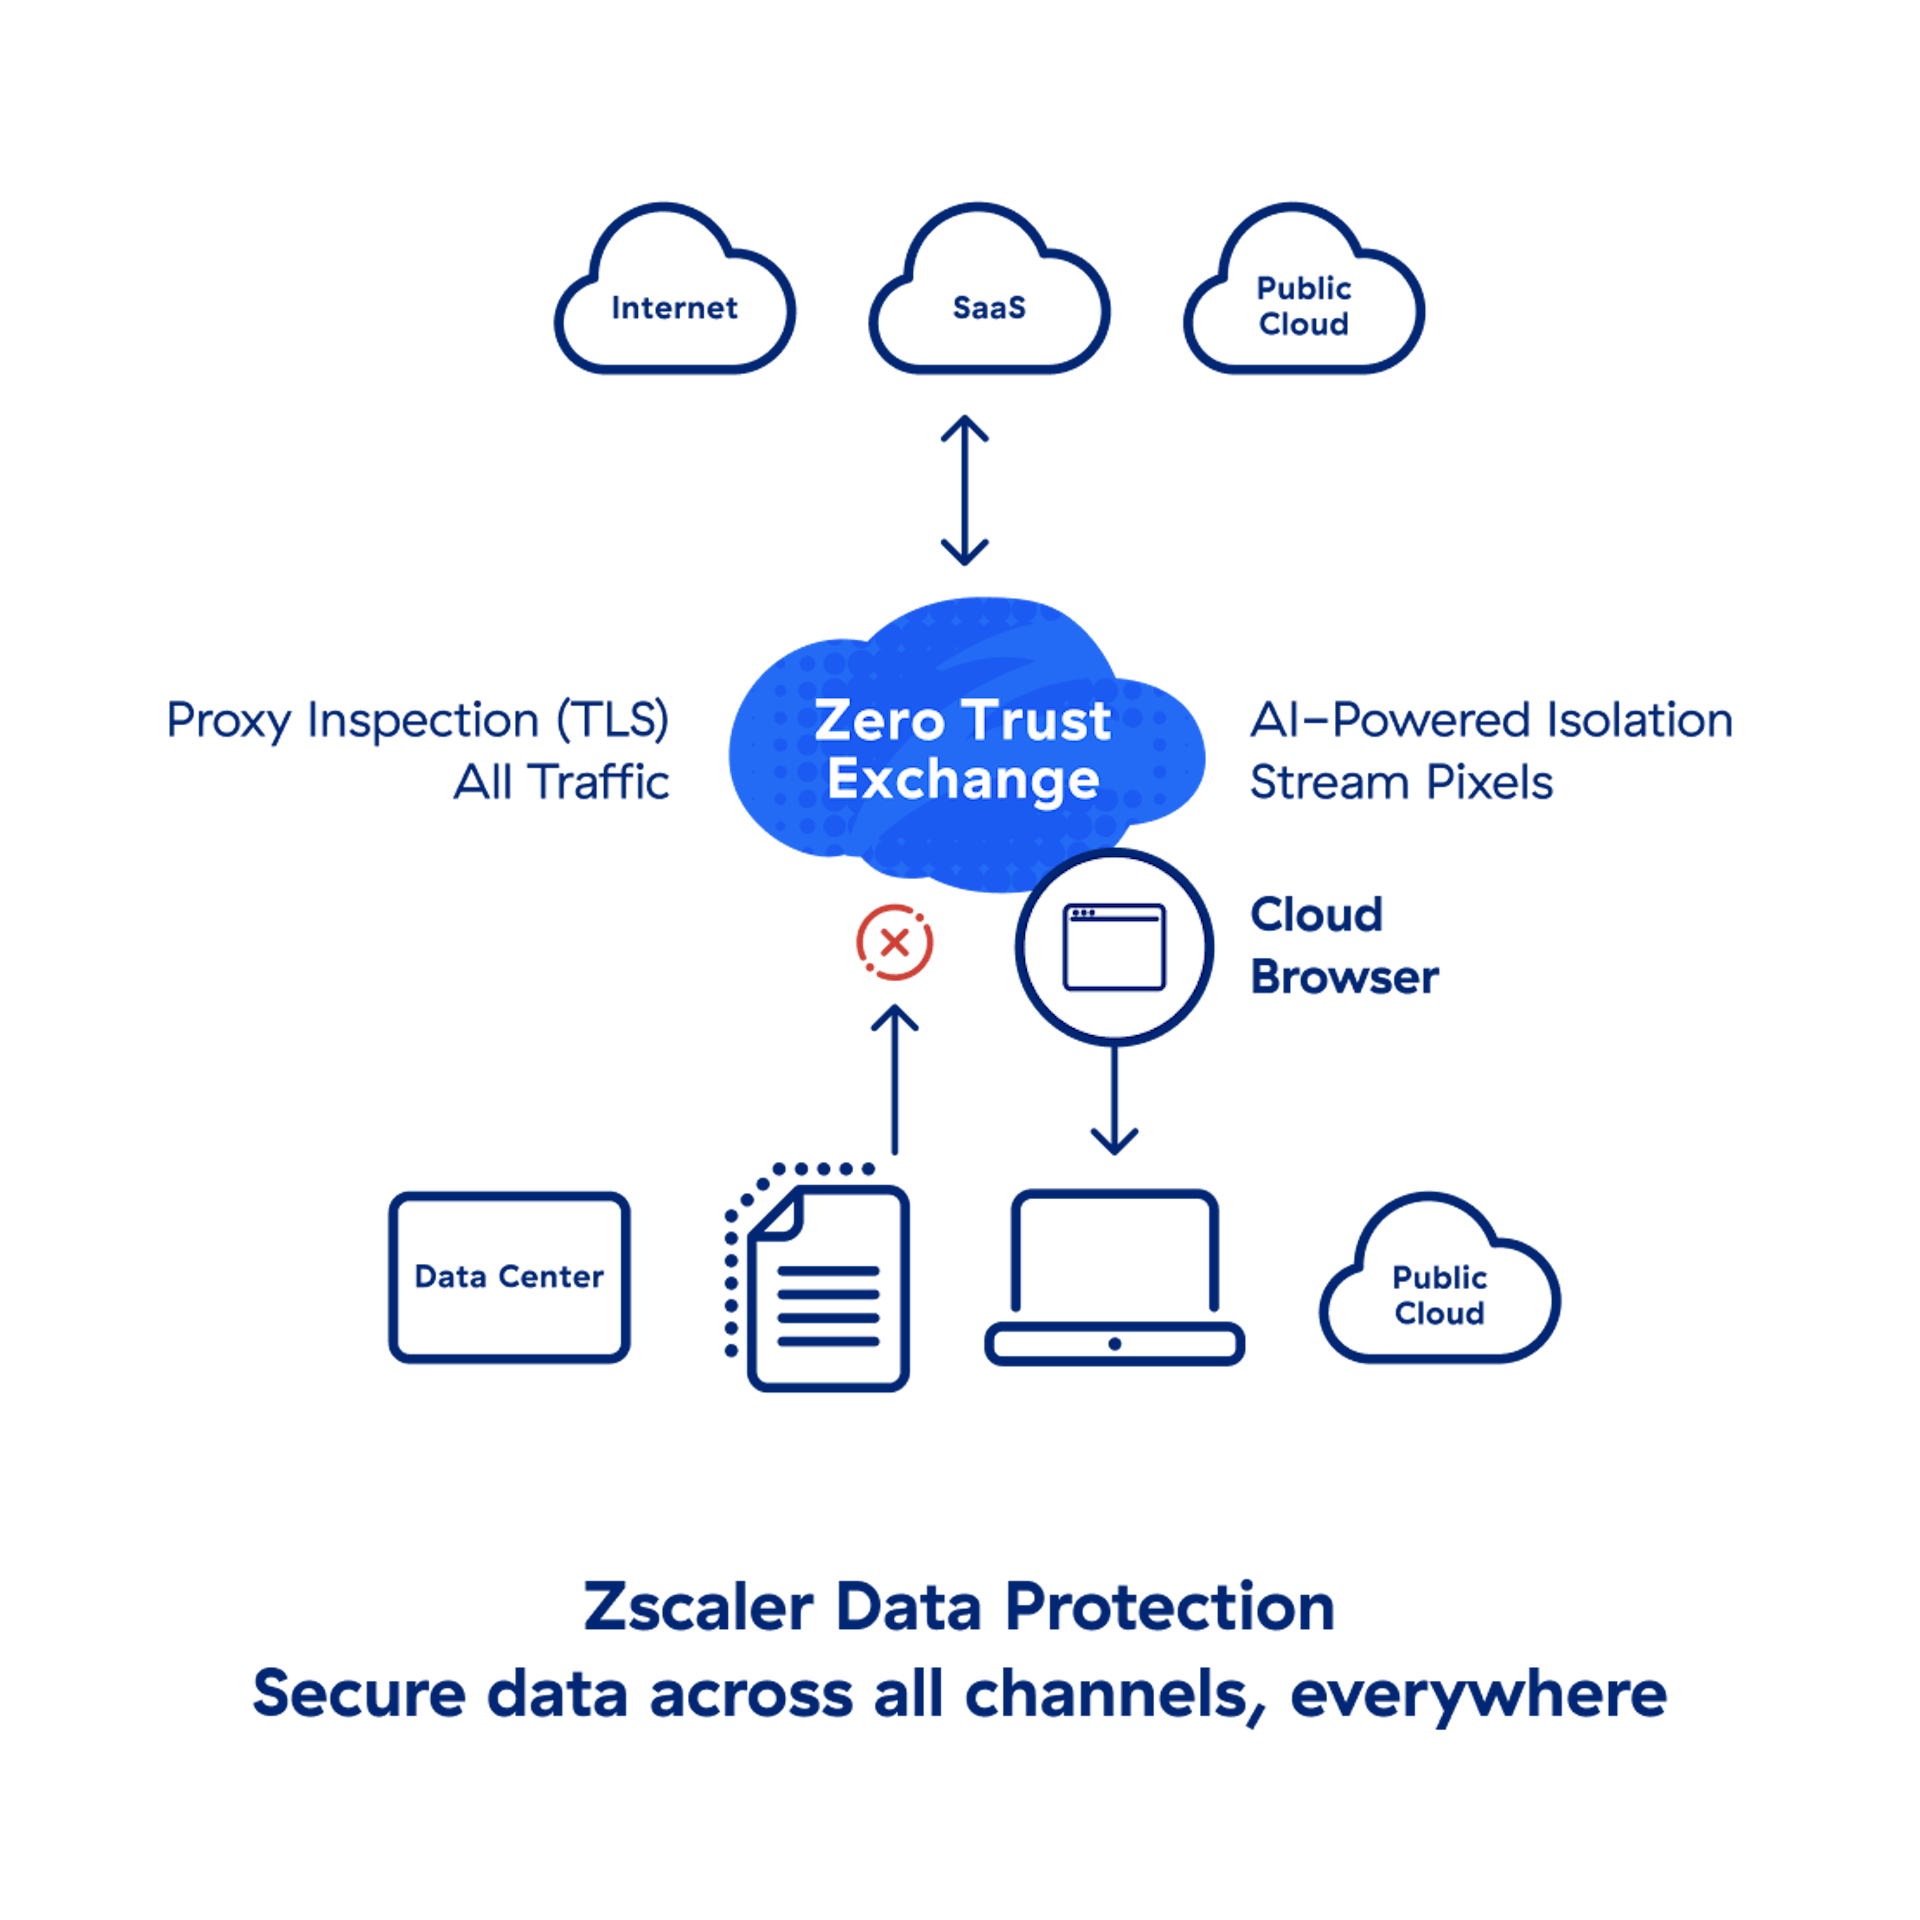 zscaler-data-protection-diagram